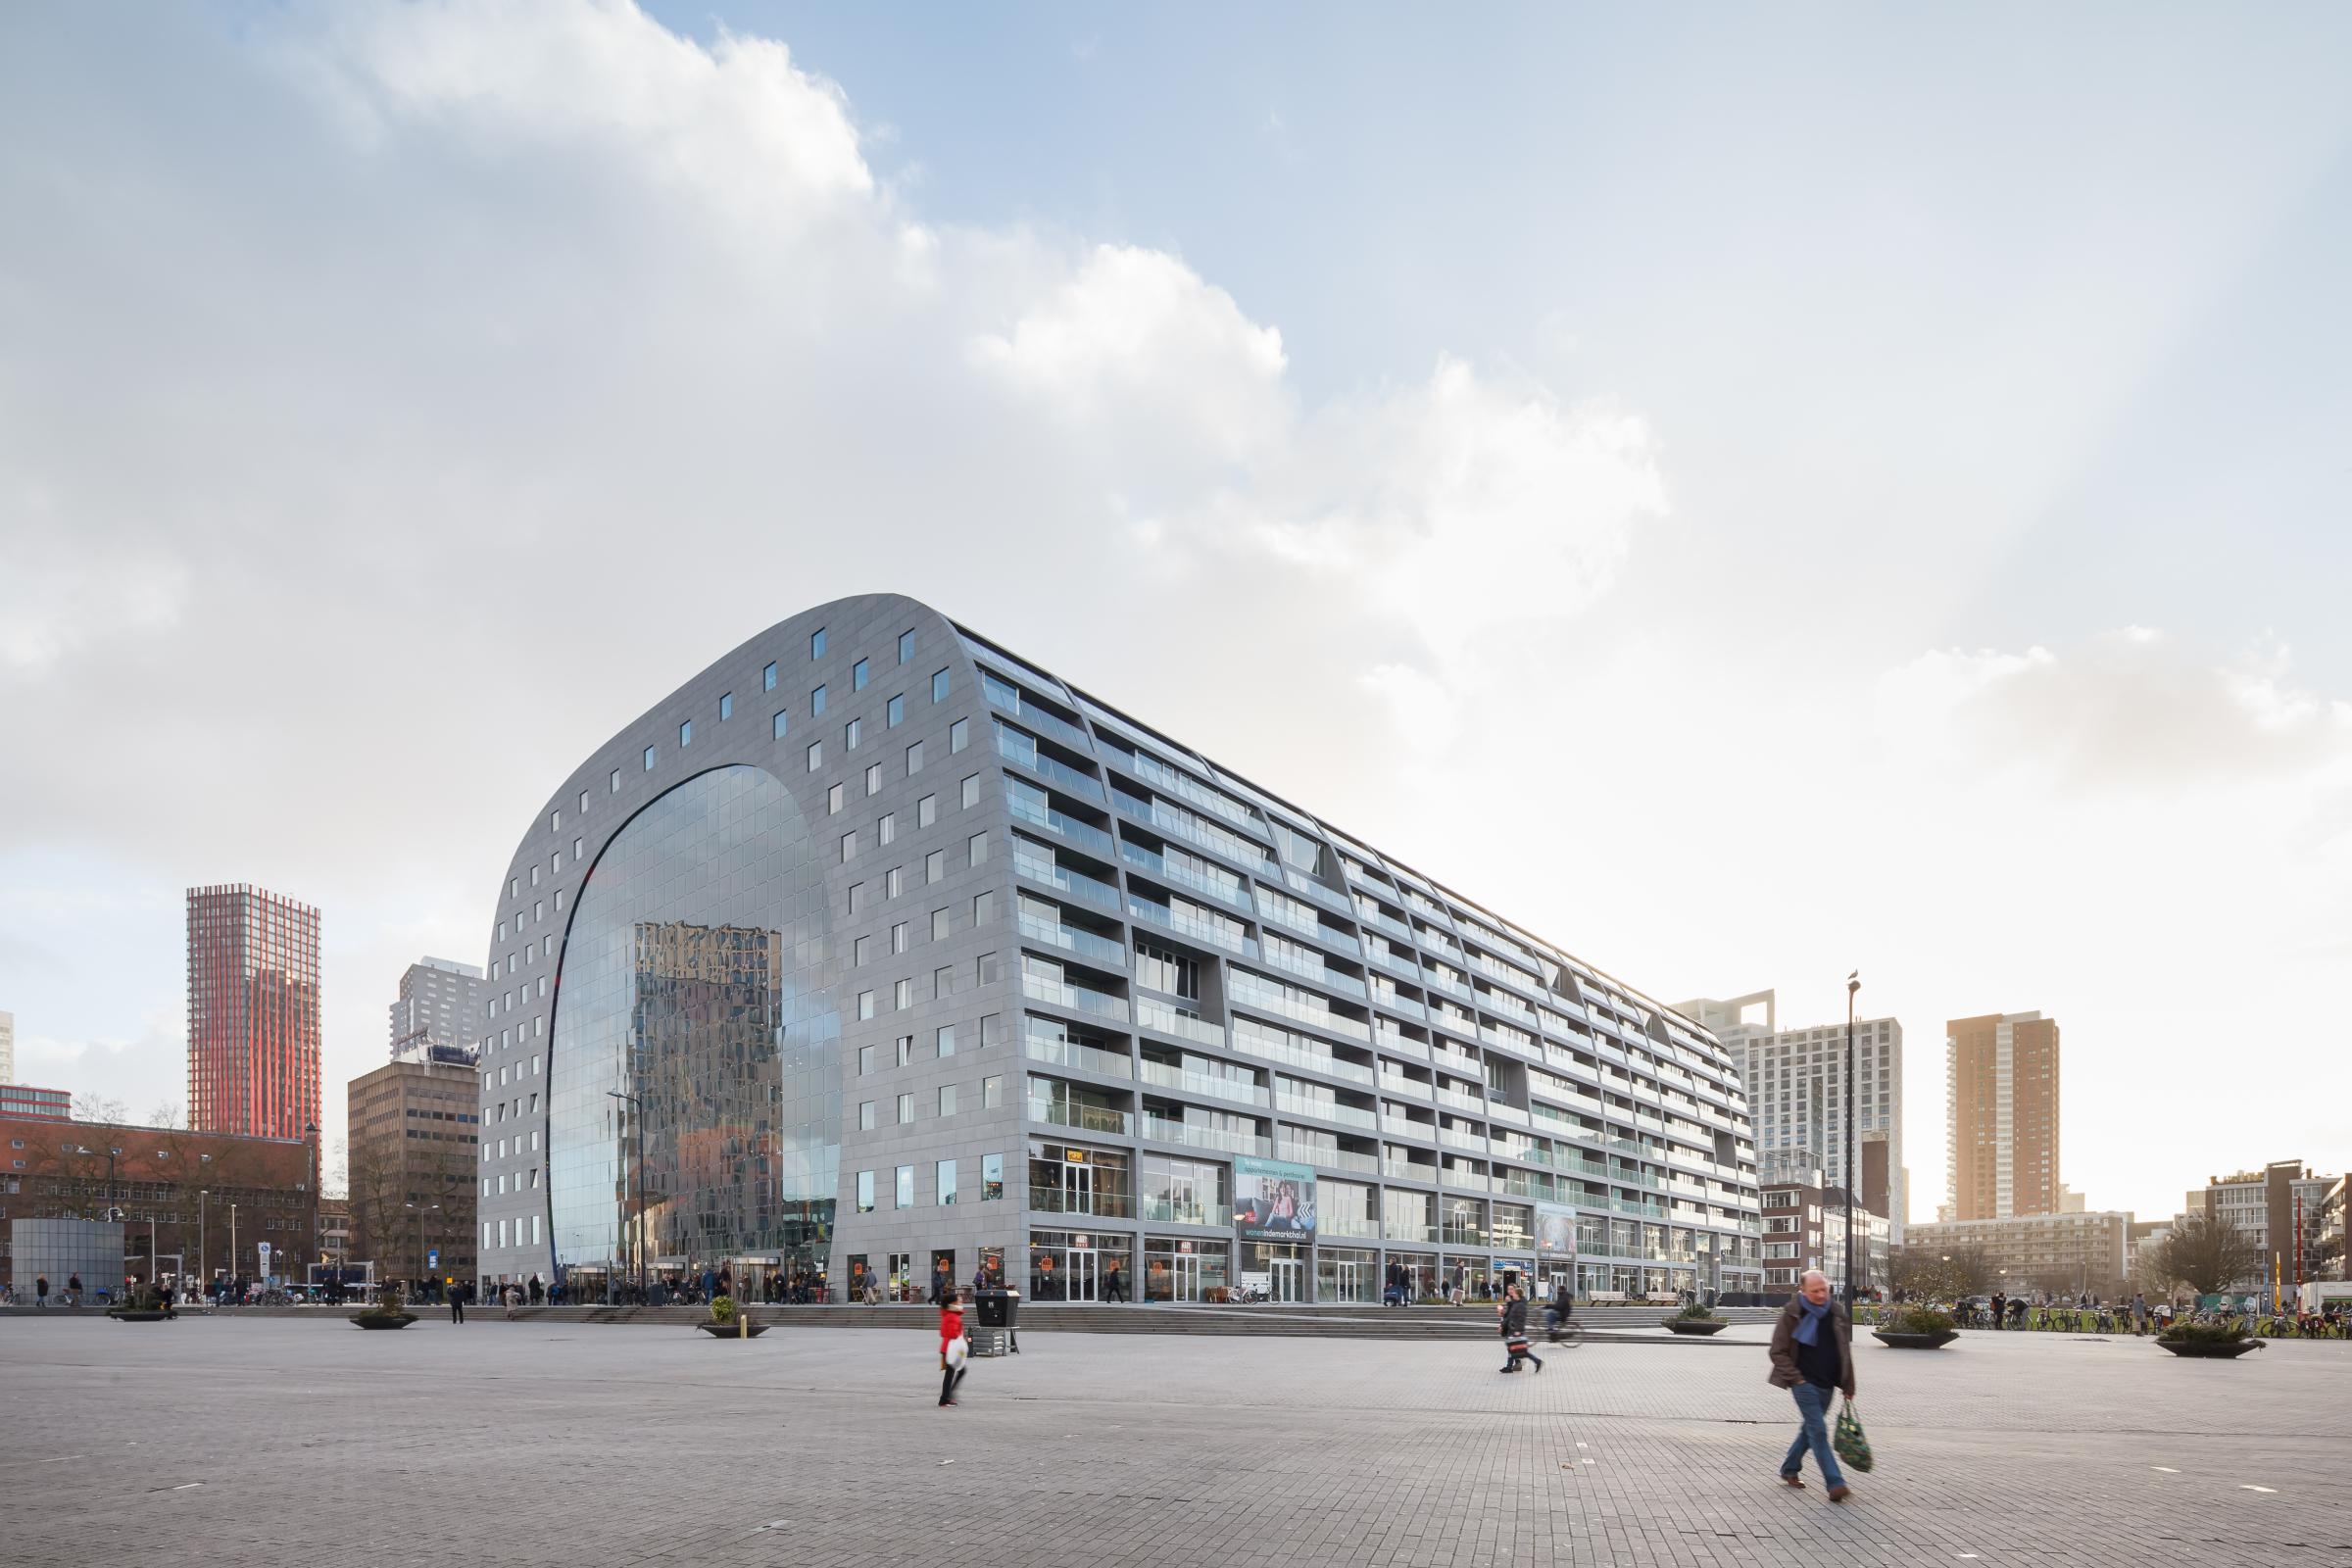 Photograph of Markthal Rotterdam, designed by MVRDV and located in Rotterdam, Netherlands